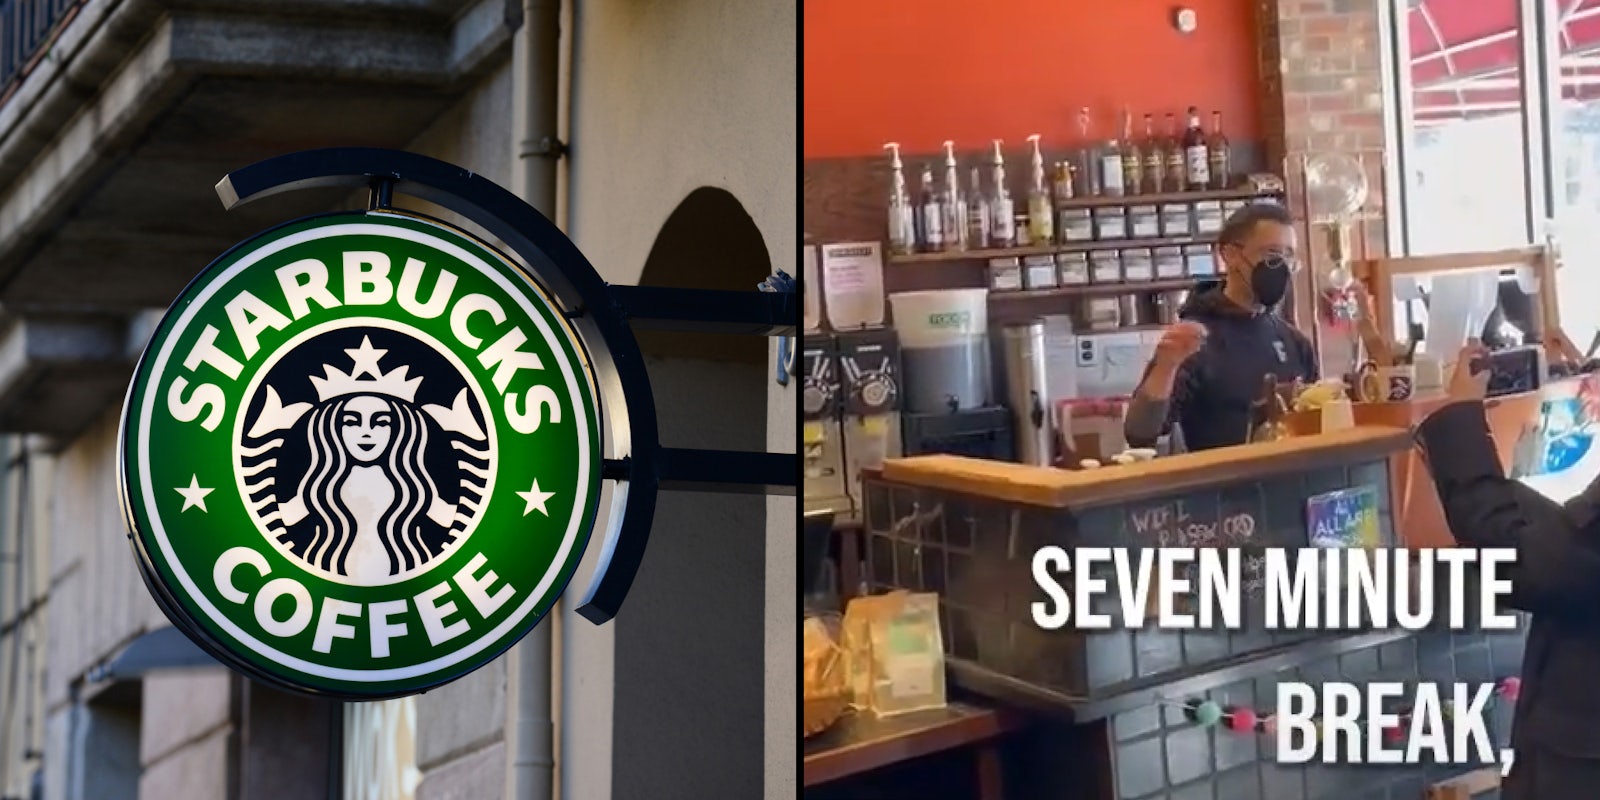 Starbucks sign on building (l) Starbucks worker behind counter asking customers for 7 minute break for union (r)